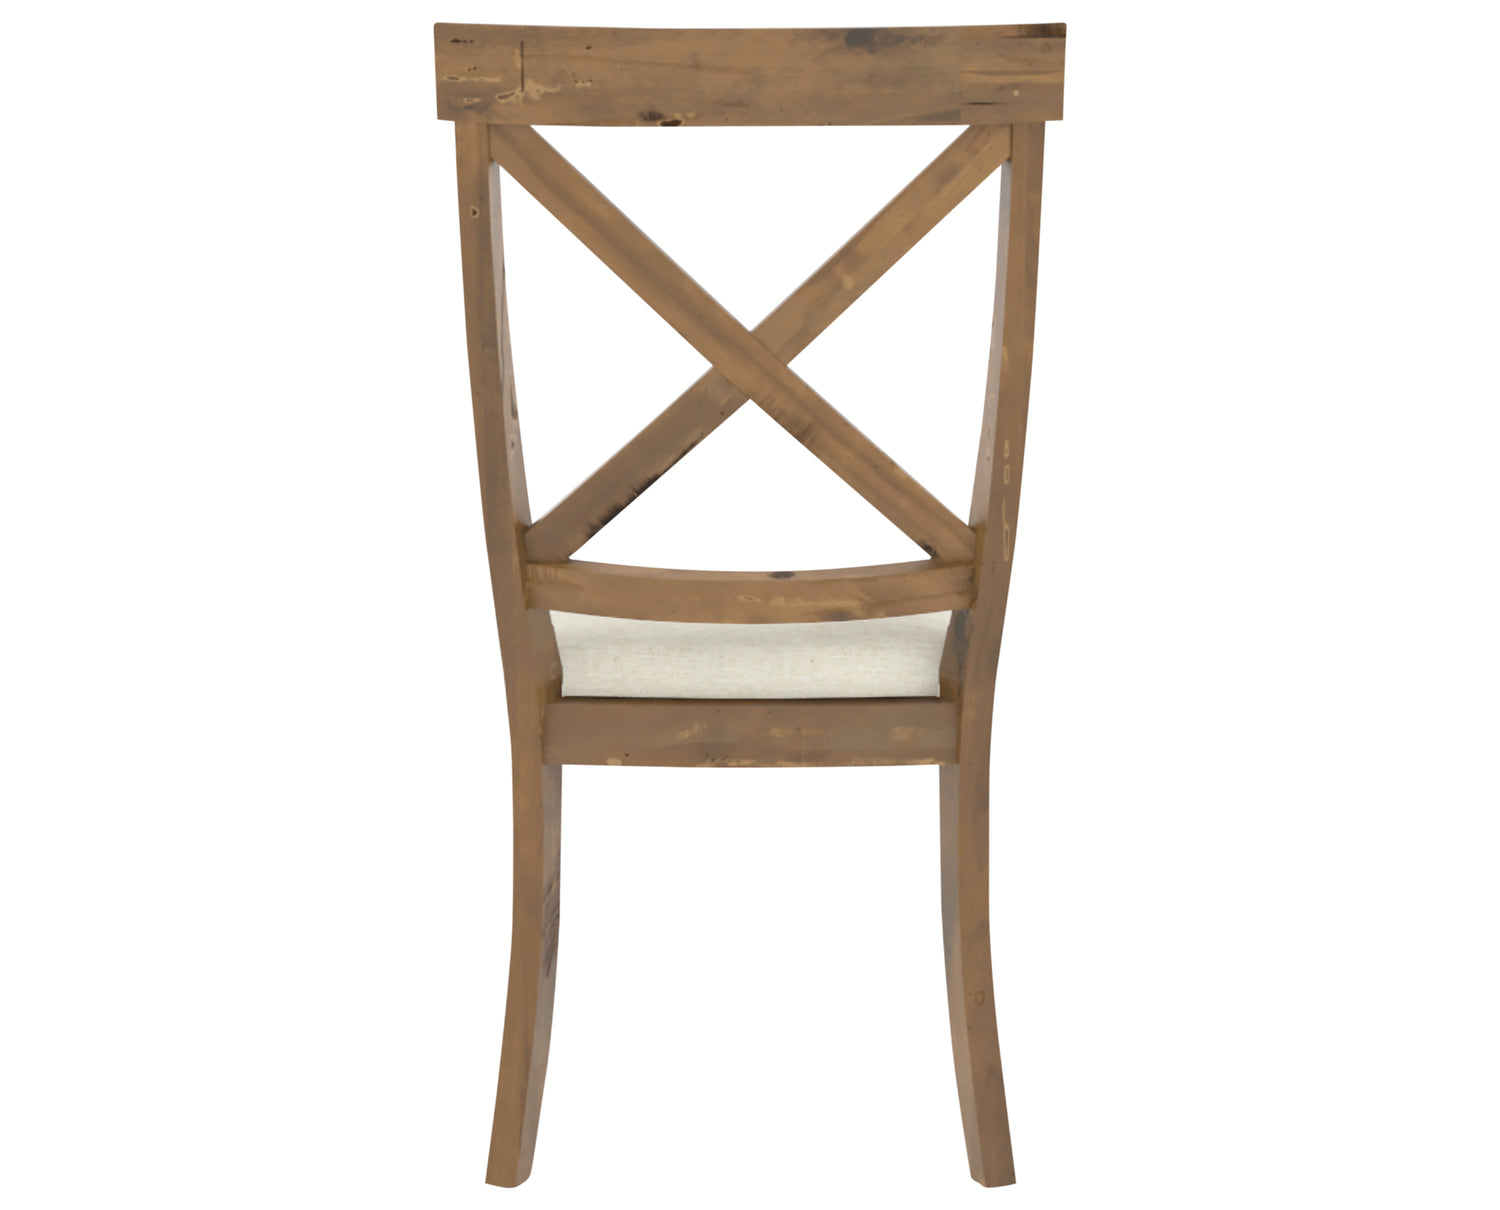 Oak Washed and Fabric TW | Canadel Champlain Dining Chair 5186 | Valley Ridge Furniture